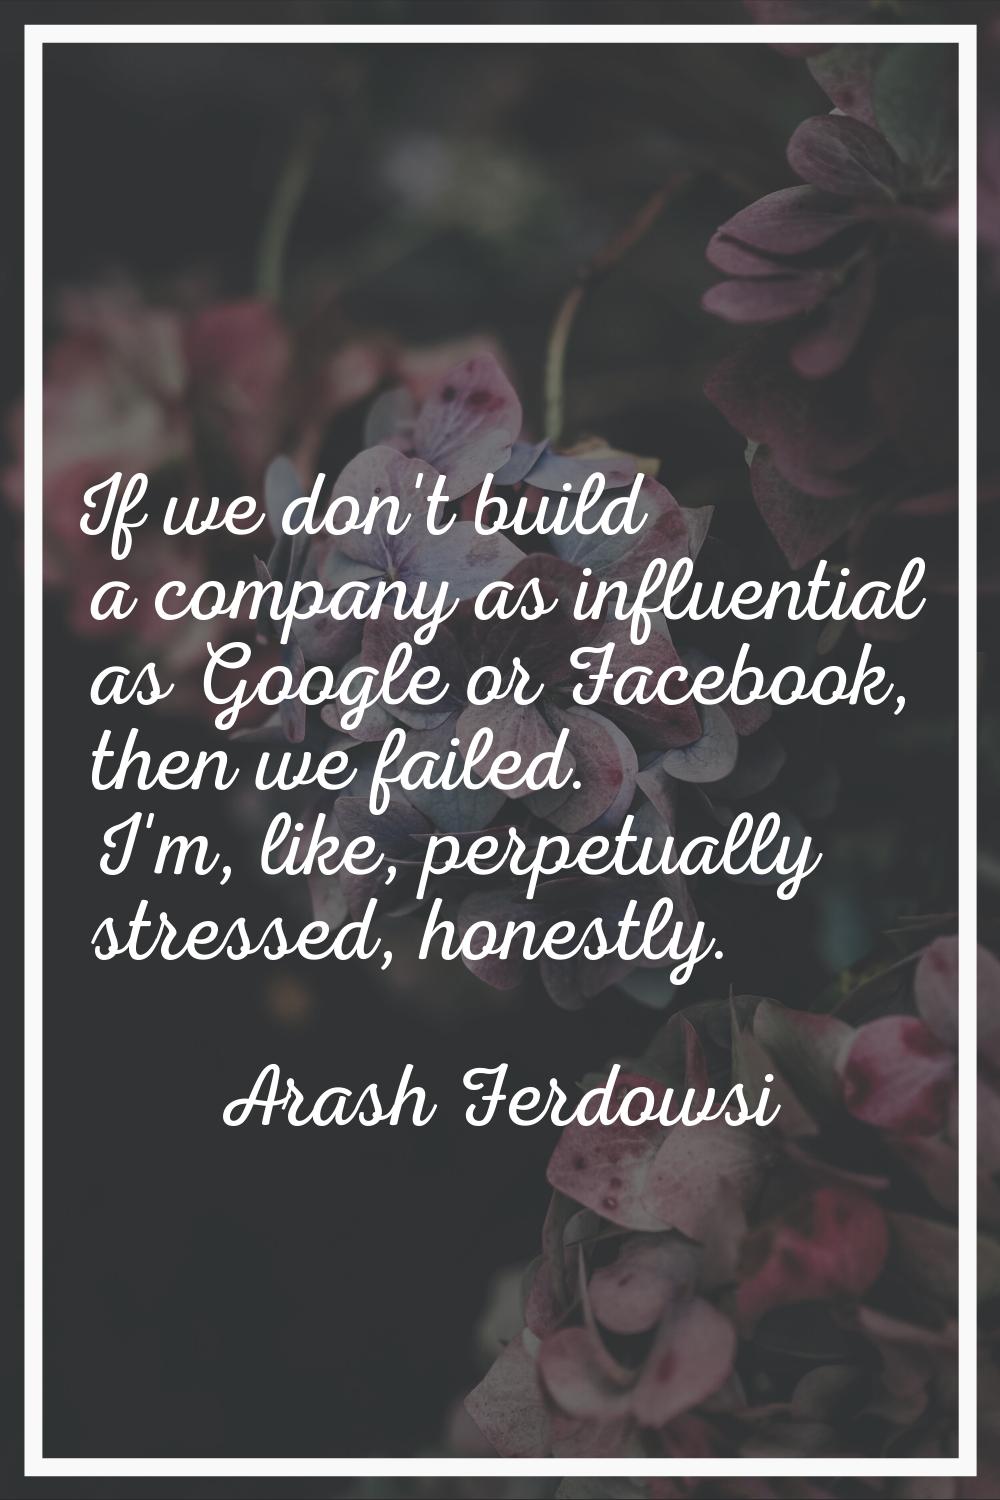 If we don't build a company as influential as Google or Facebook, then we failed. I'm, like, perpet